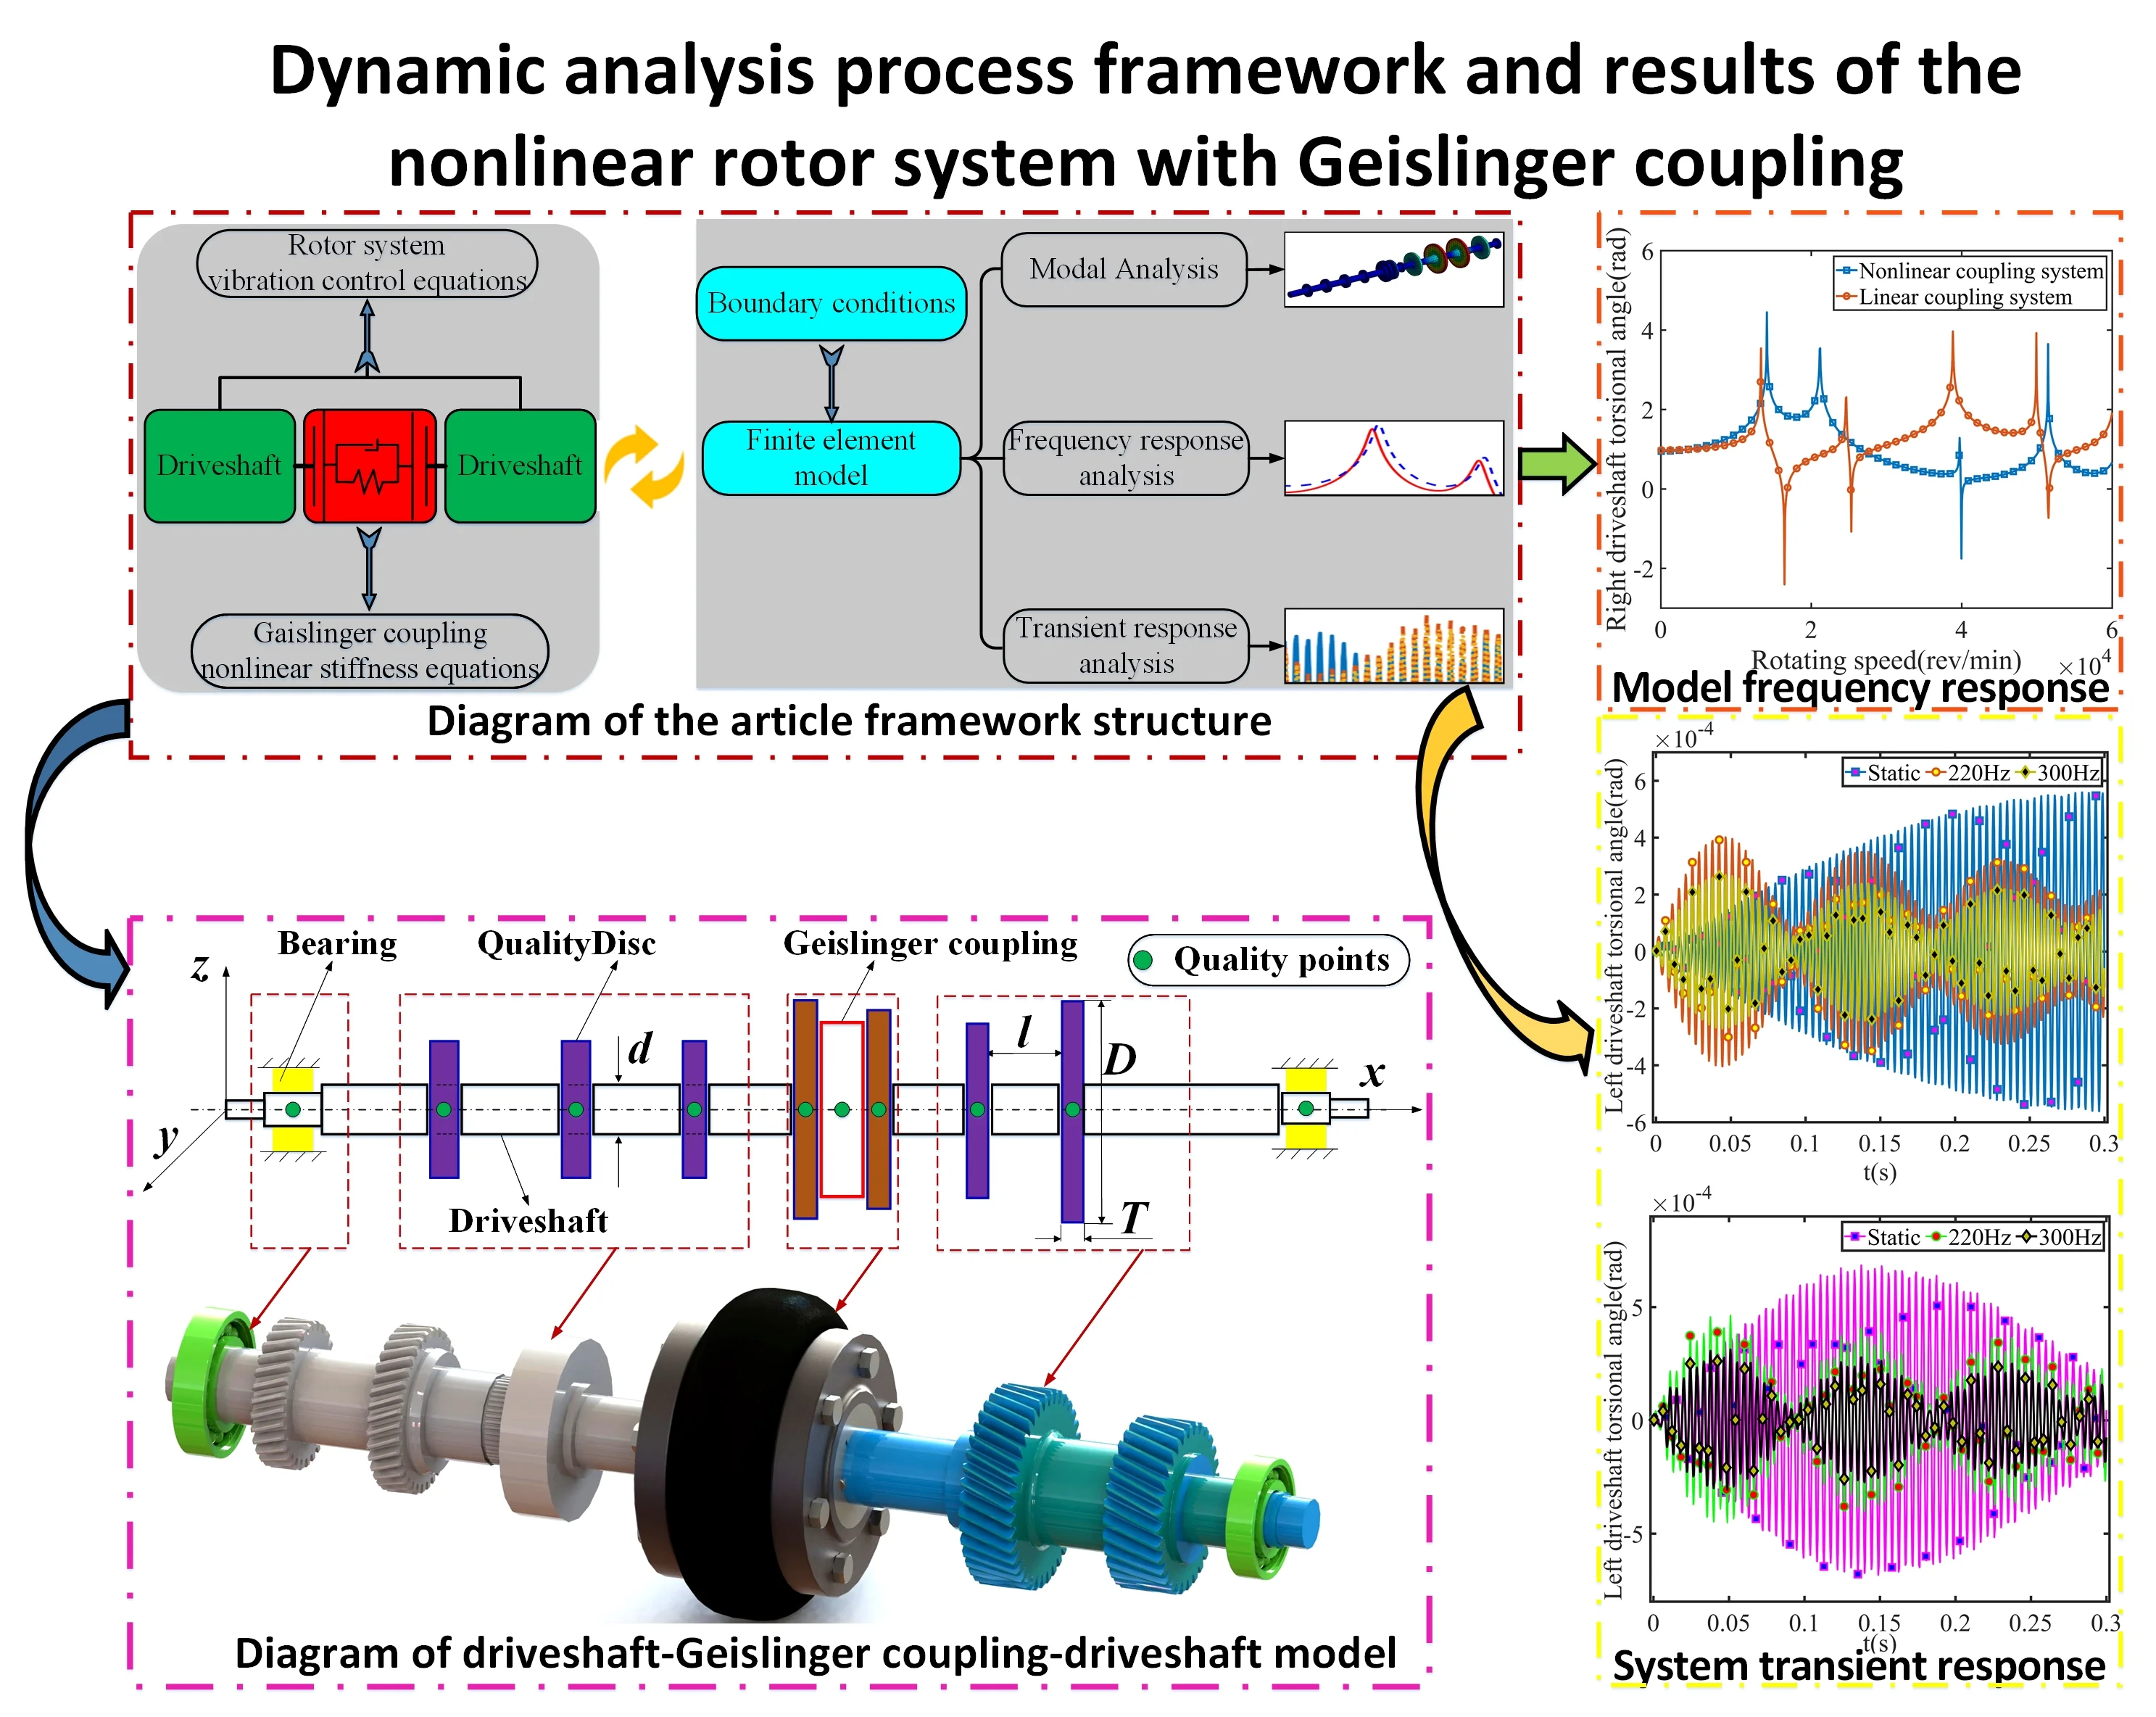 Dynamics analysis of the nonlinear rotor system with Geislinger coupling